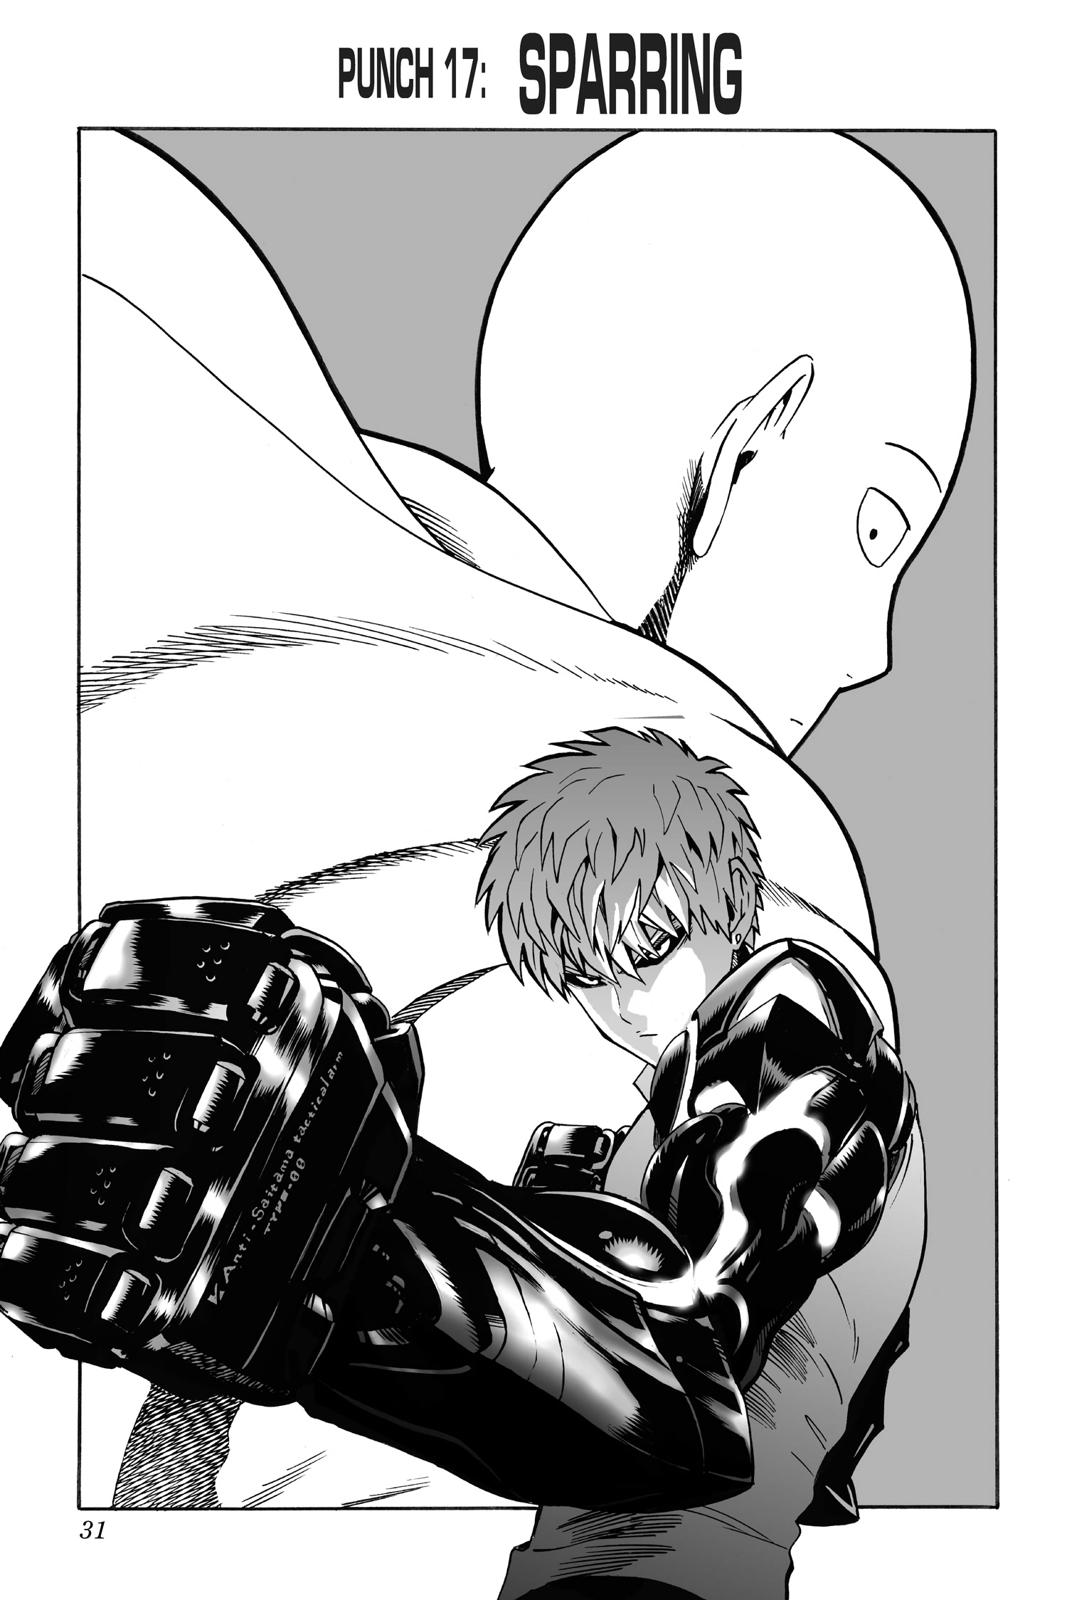 One-Punch Man, Punch 17 image 01